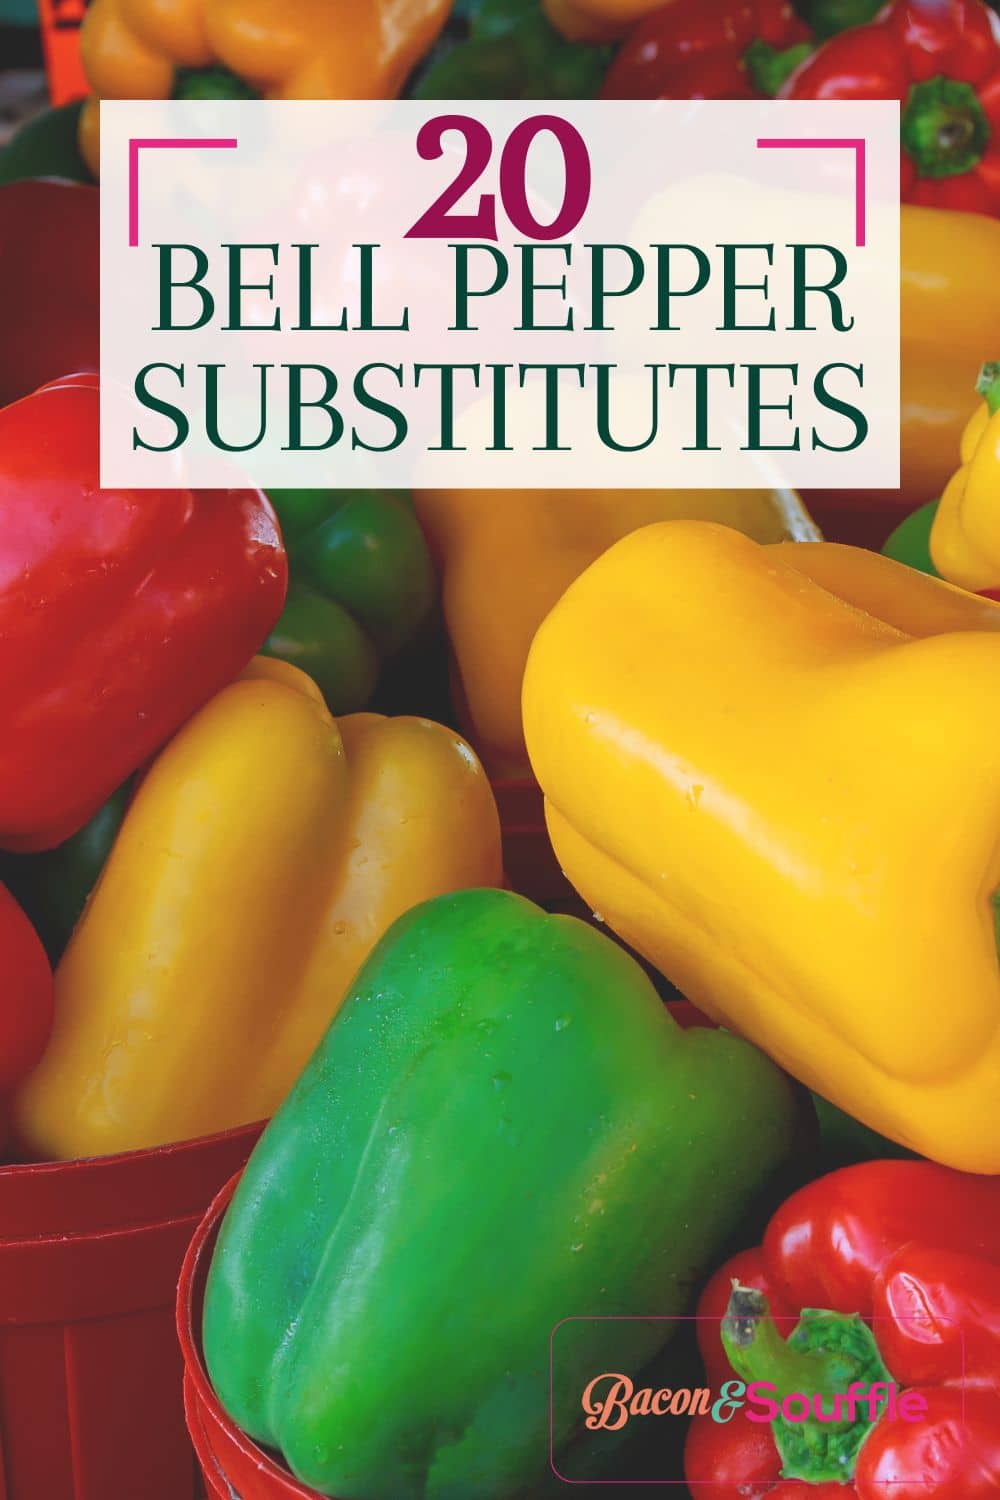 Bell pepper substitutes pin.